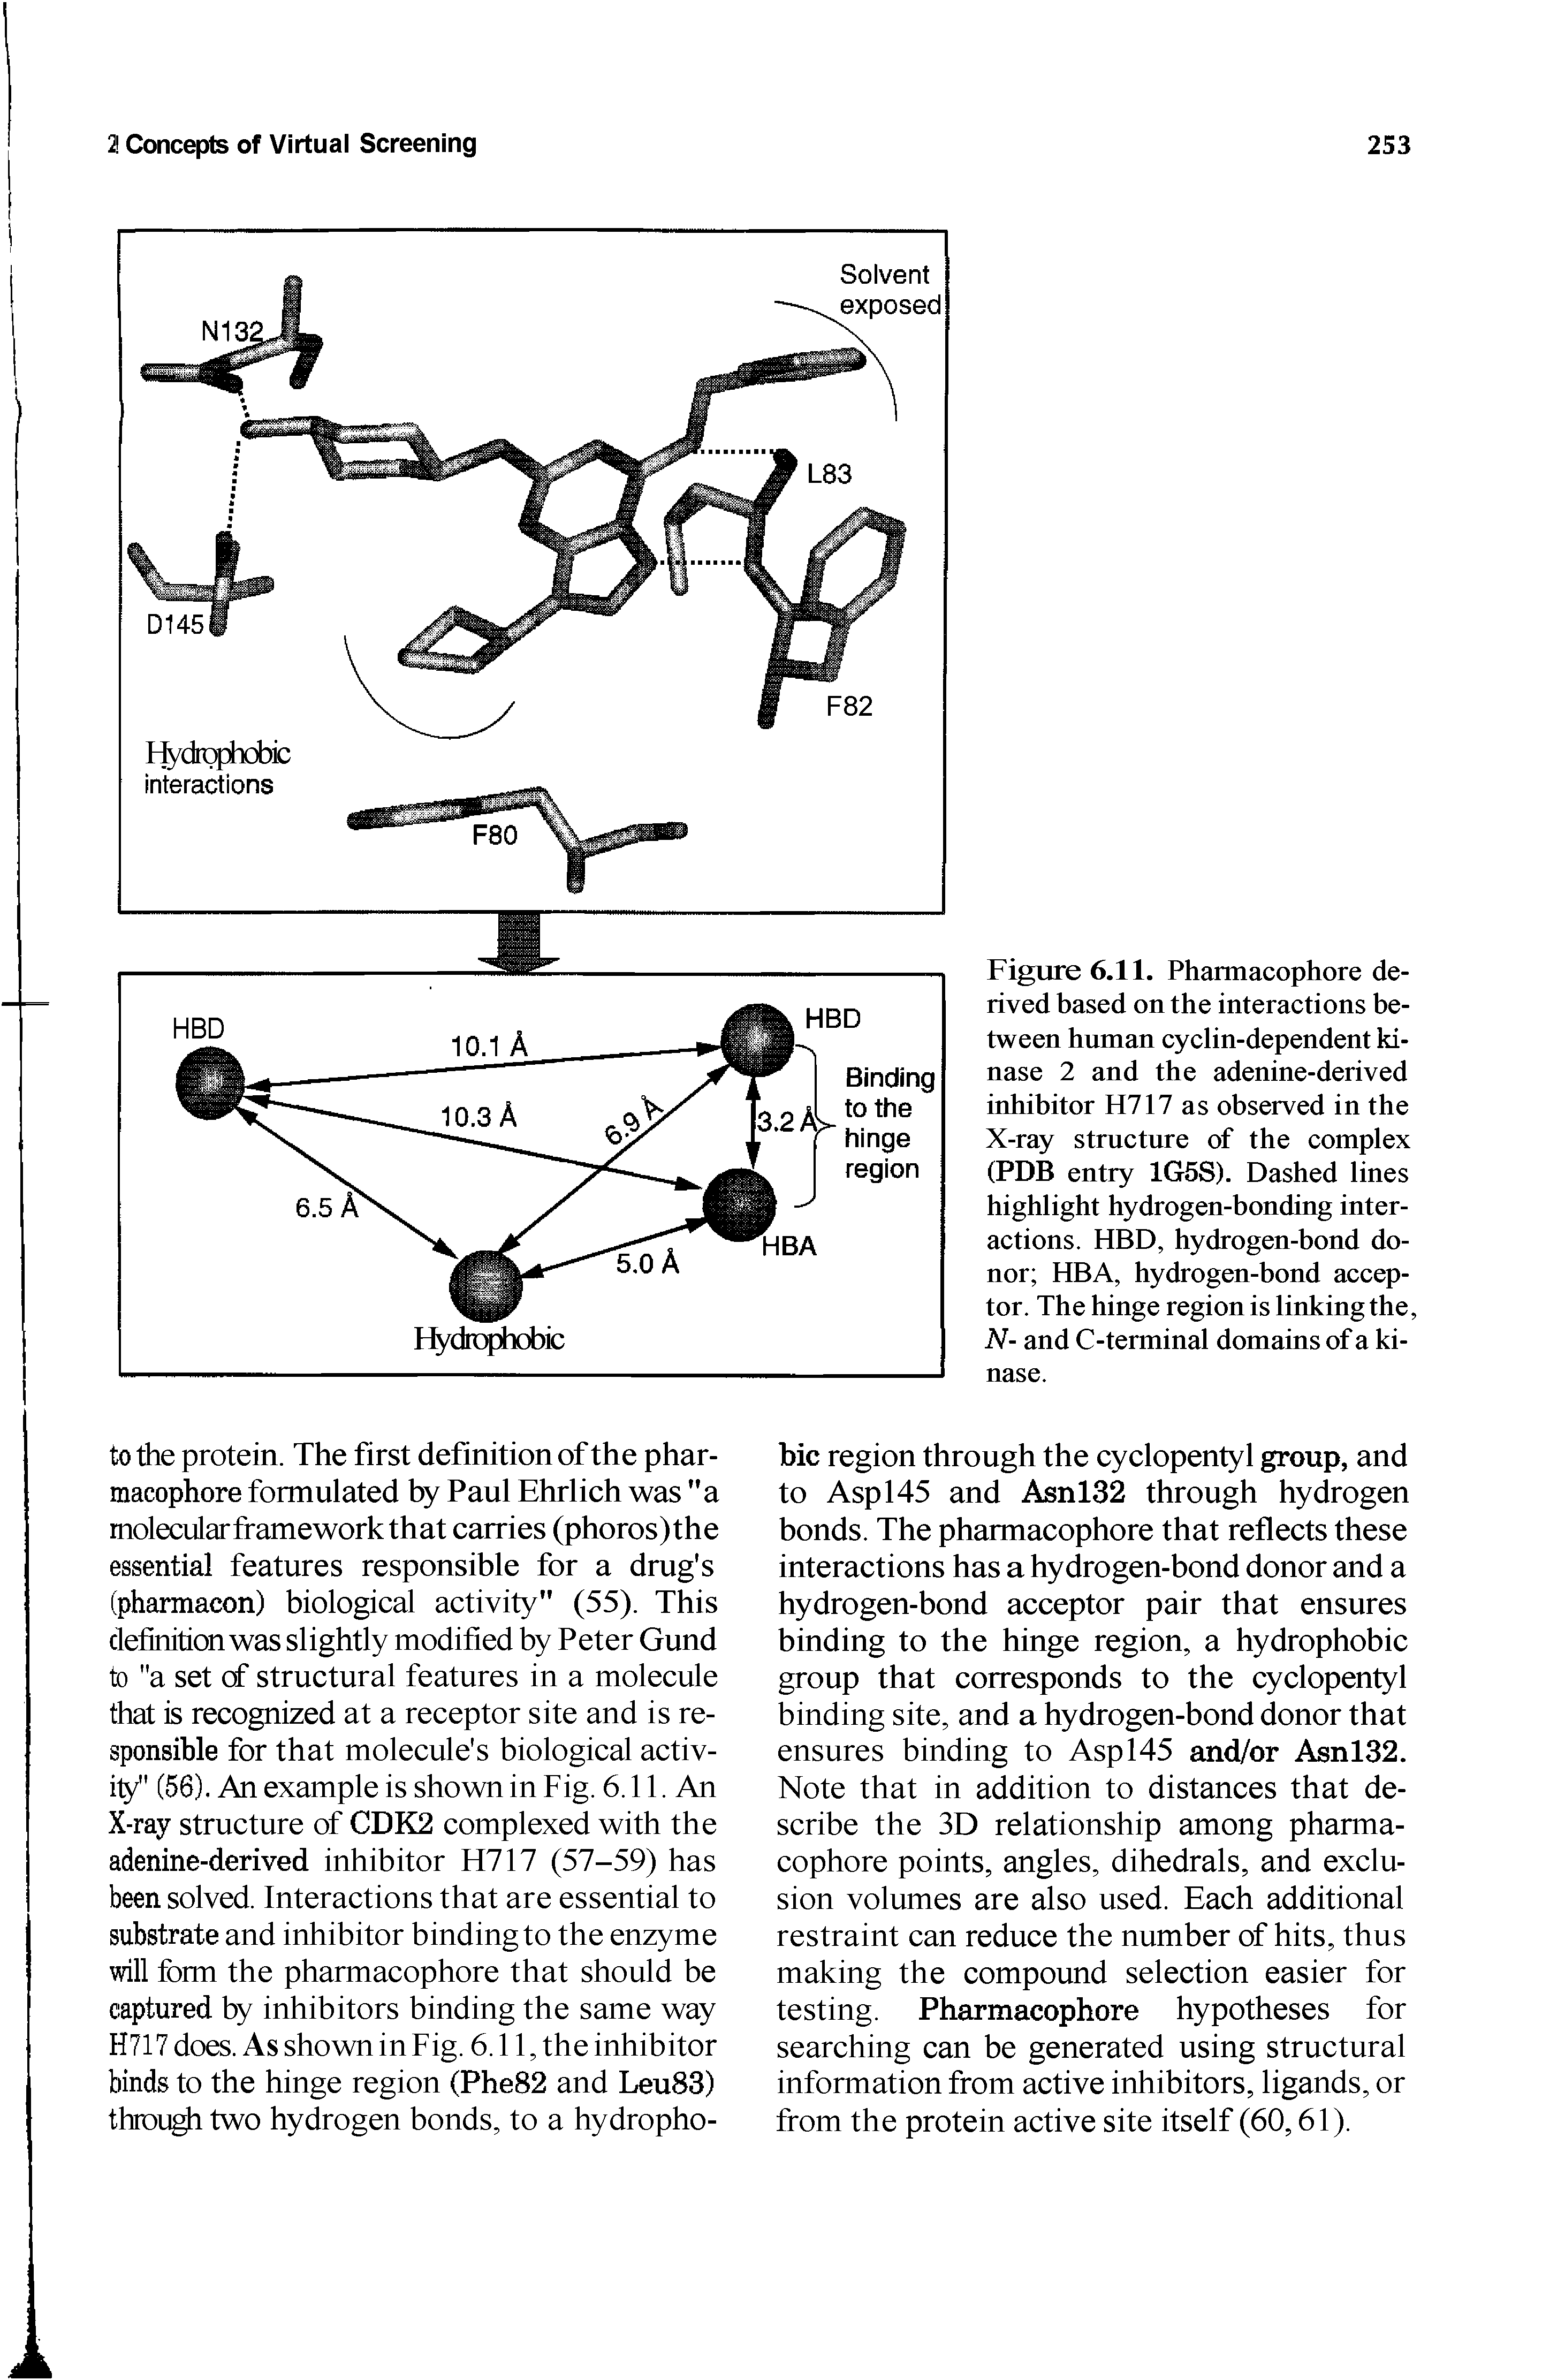 Figure 6.11. Pharmacophore derived based on the interactions between human cyclin-dependent kinase 2 and the adenine-derived inhibitor H717 as observed in the X-ray structure of the complex (PDB entry 1G5S). Dashed lines highlight hydrogen-bonding interactions. HBD, hydrogen-bond donor HBA, hydrogen-bond acceptor. The hinge region is linking the, N- and C-terminal domains of a kinase.